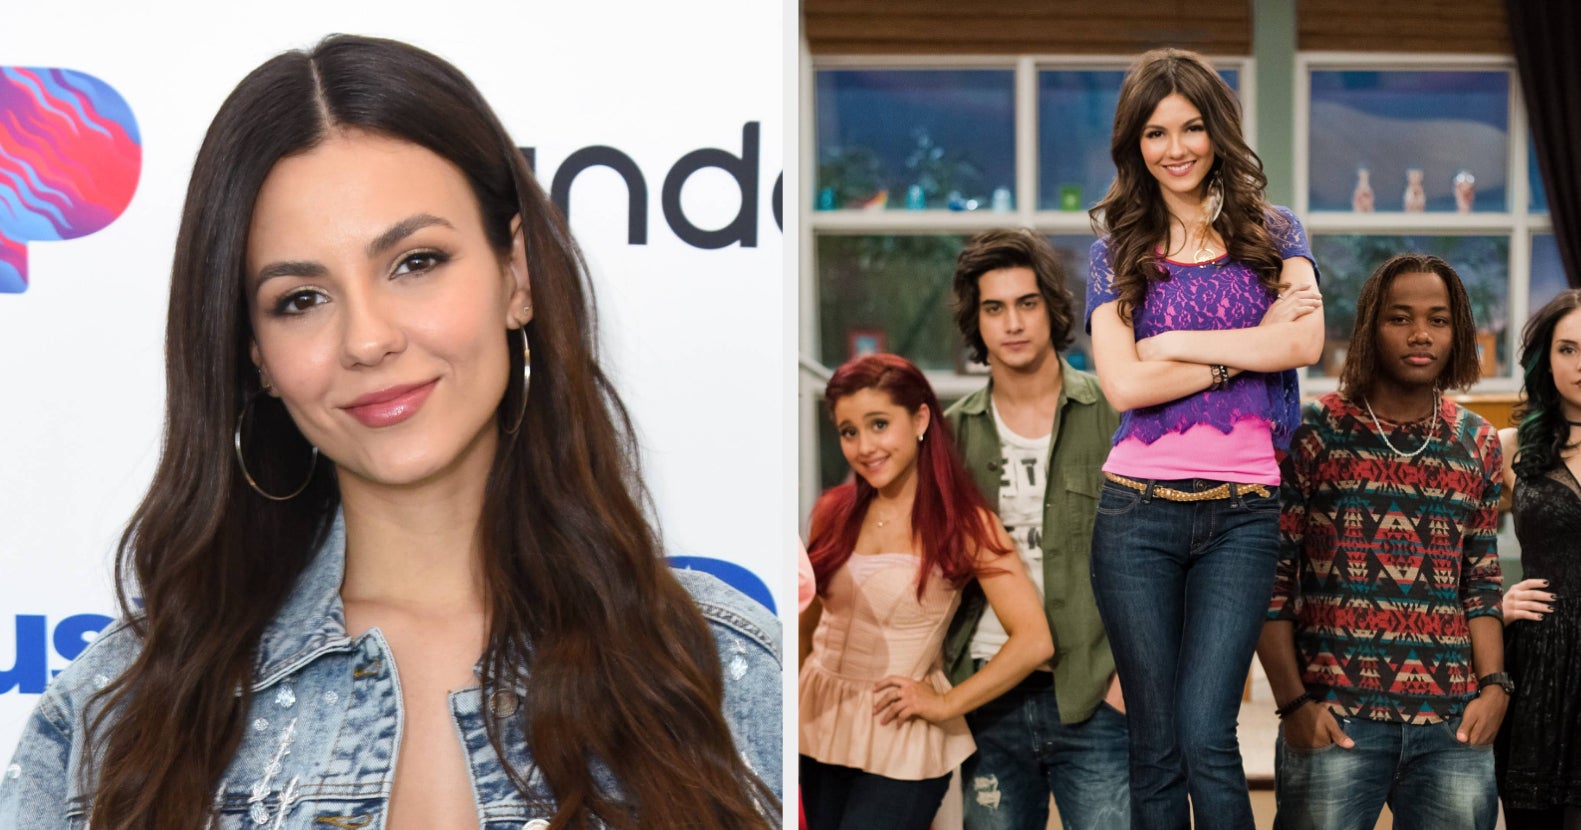 Victoria Justice Broke Her Silence On The "Quiet On Set" Documentary And Her Experience Working With Dan Schneider On "Victorious"